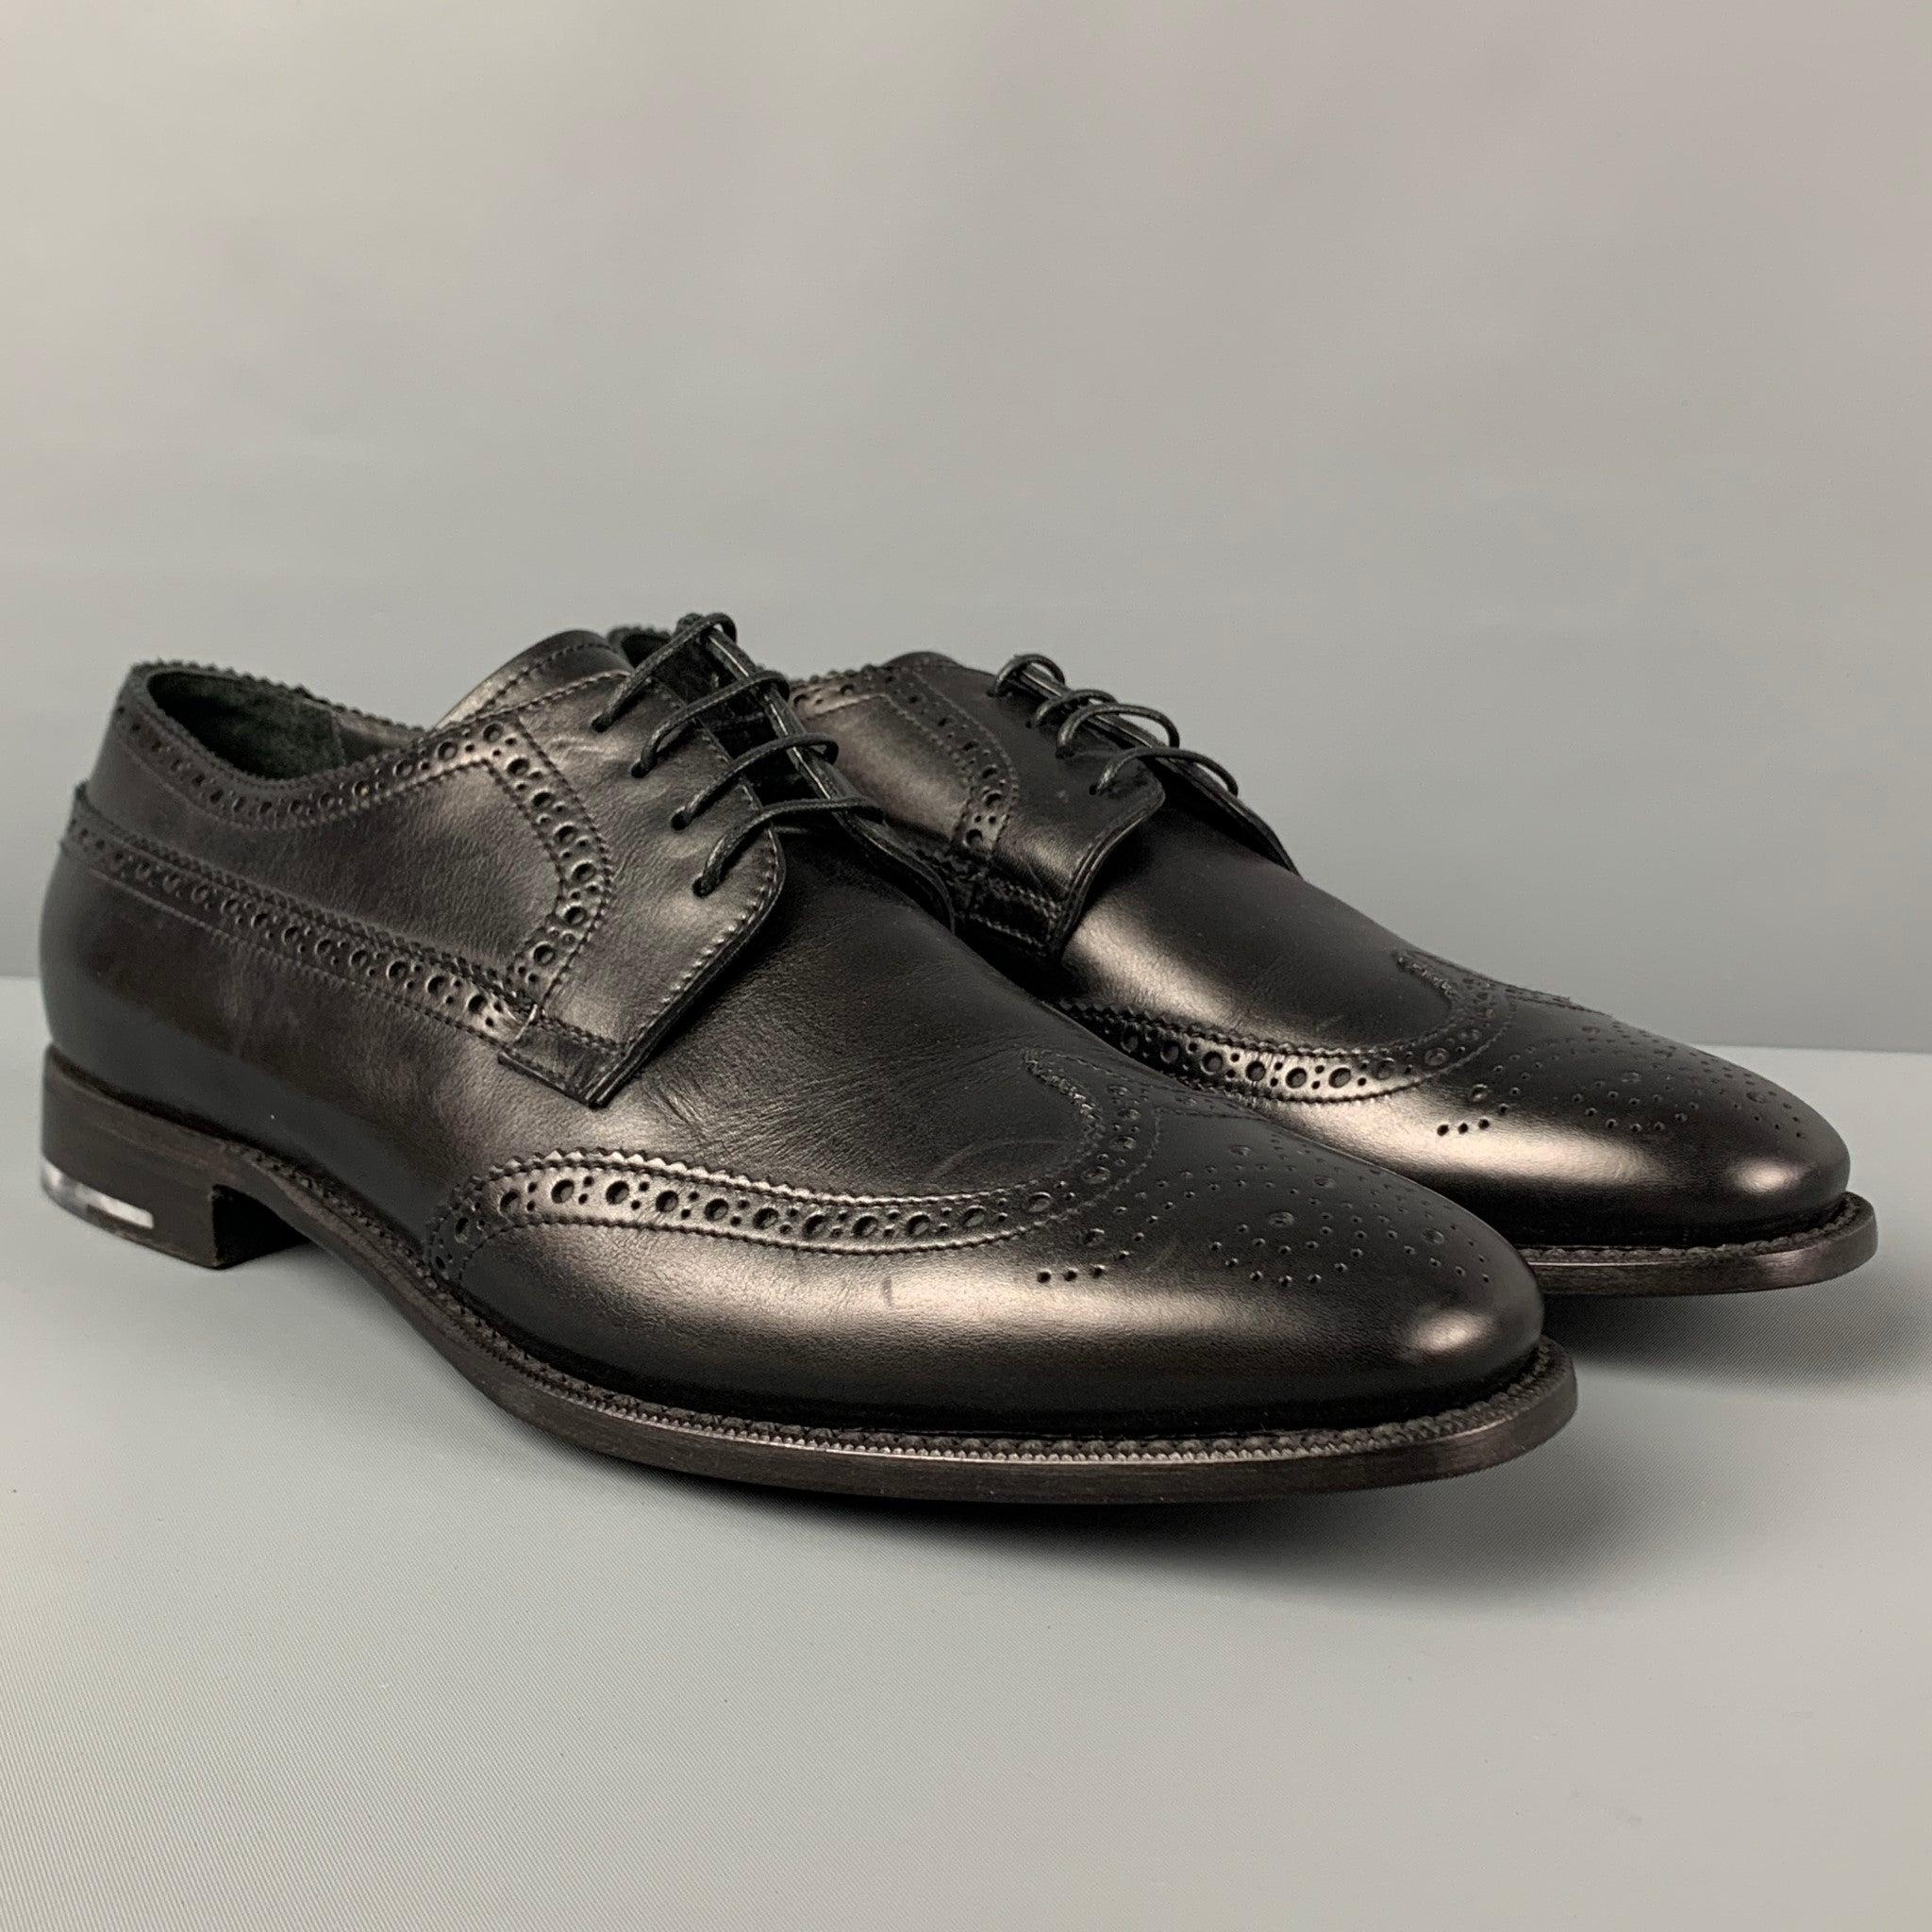 GIORGIO ARMANI shoes comes in a black perforated leather featuring a wingtip style and a lace up closure. Includes box.
Very Good
Pre-Owned Condition. 

Marked:  
9Outsole: 12.25 inches  x 4.25 inches 
  
  
 
Reference: 119935
Category: Lace Up